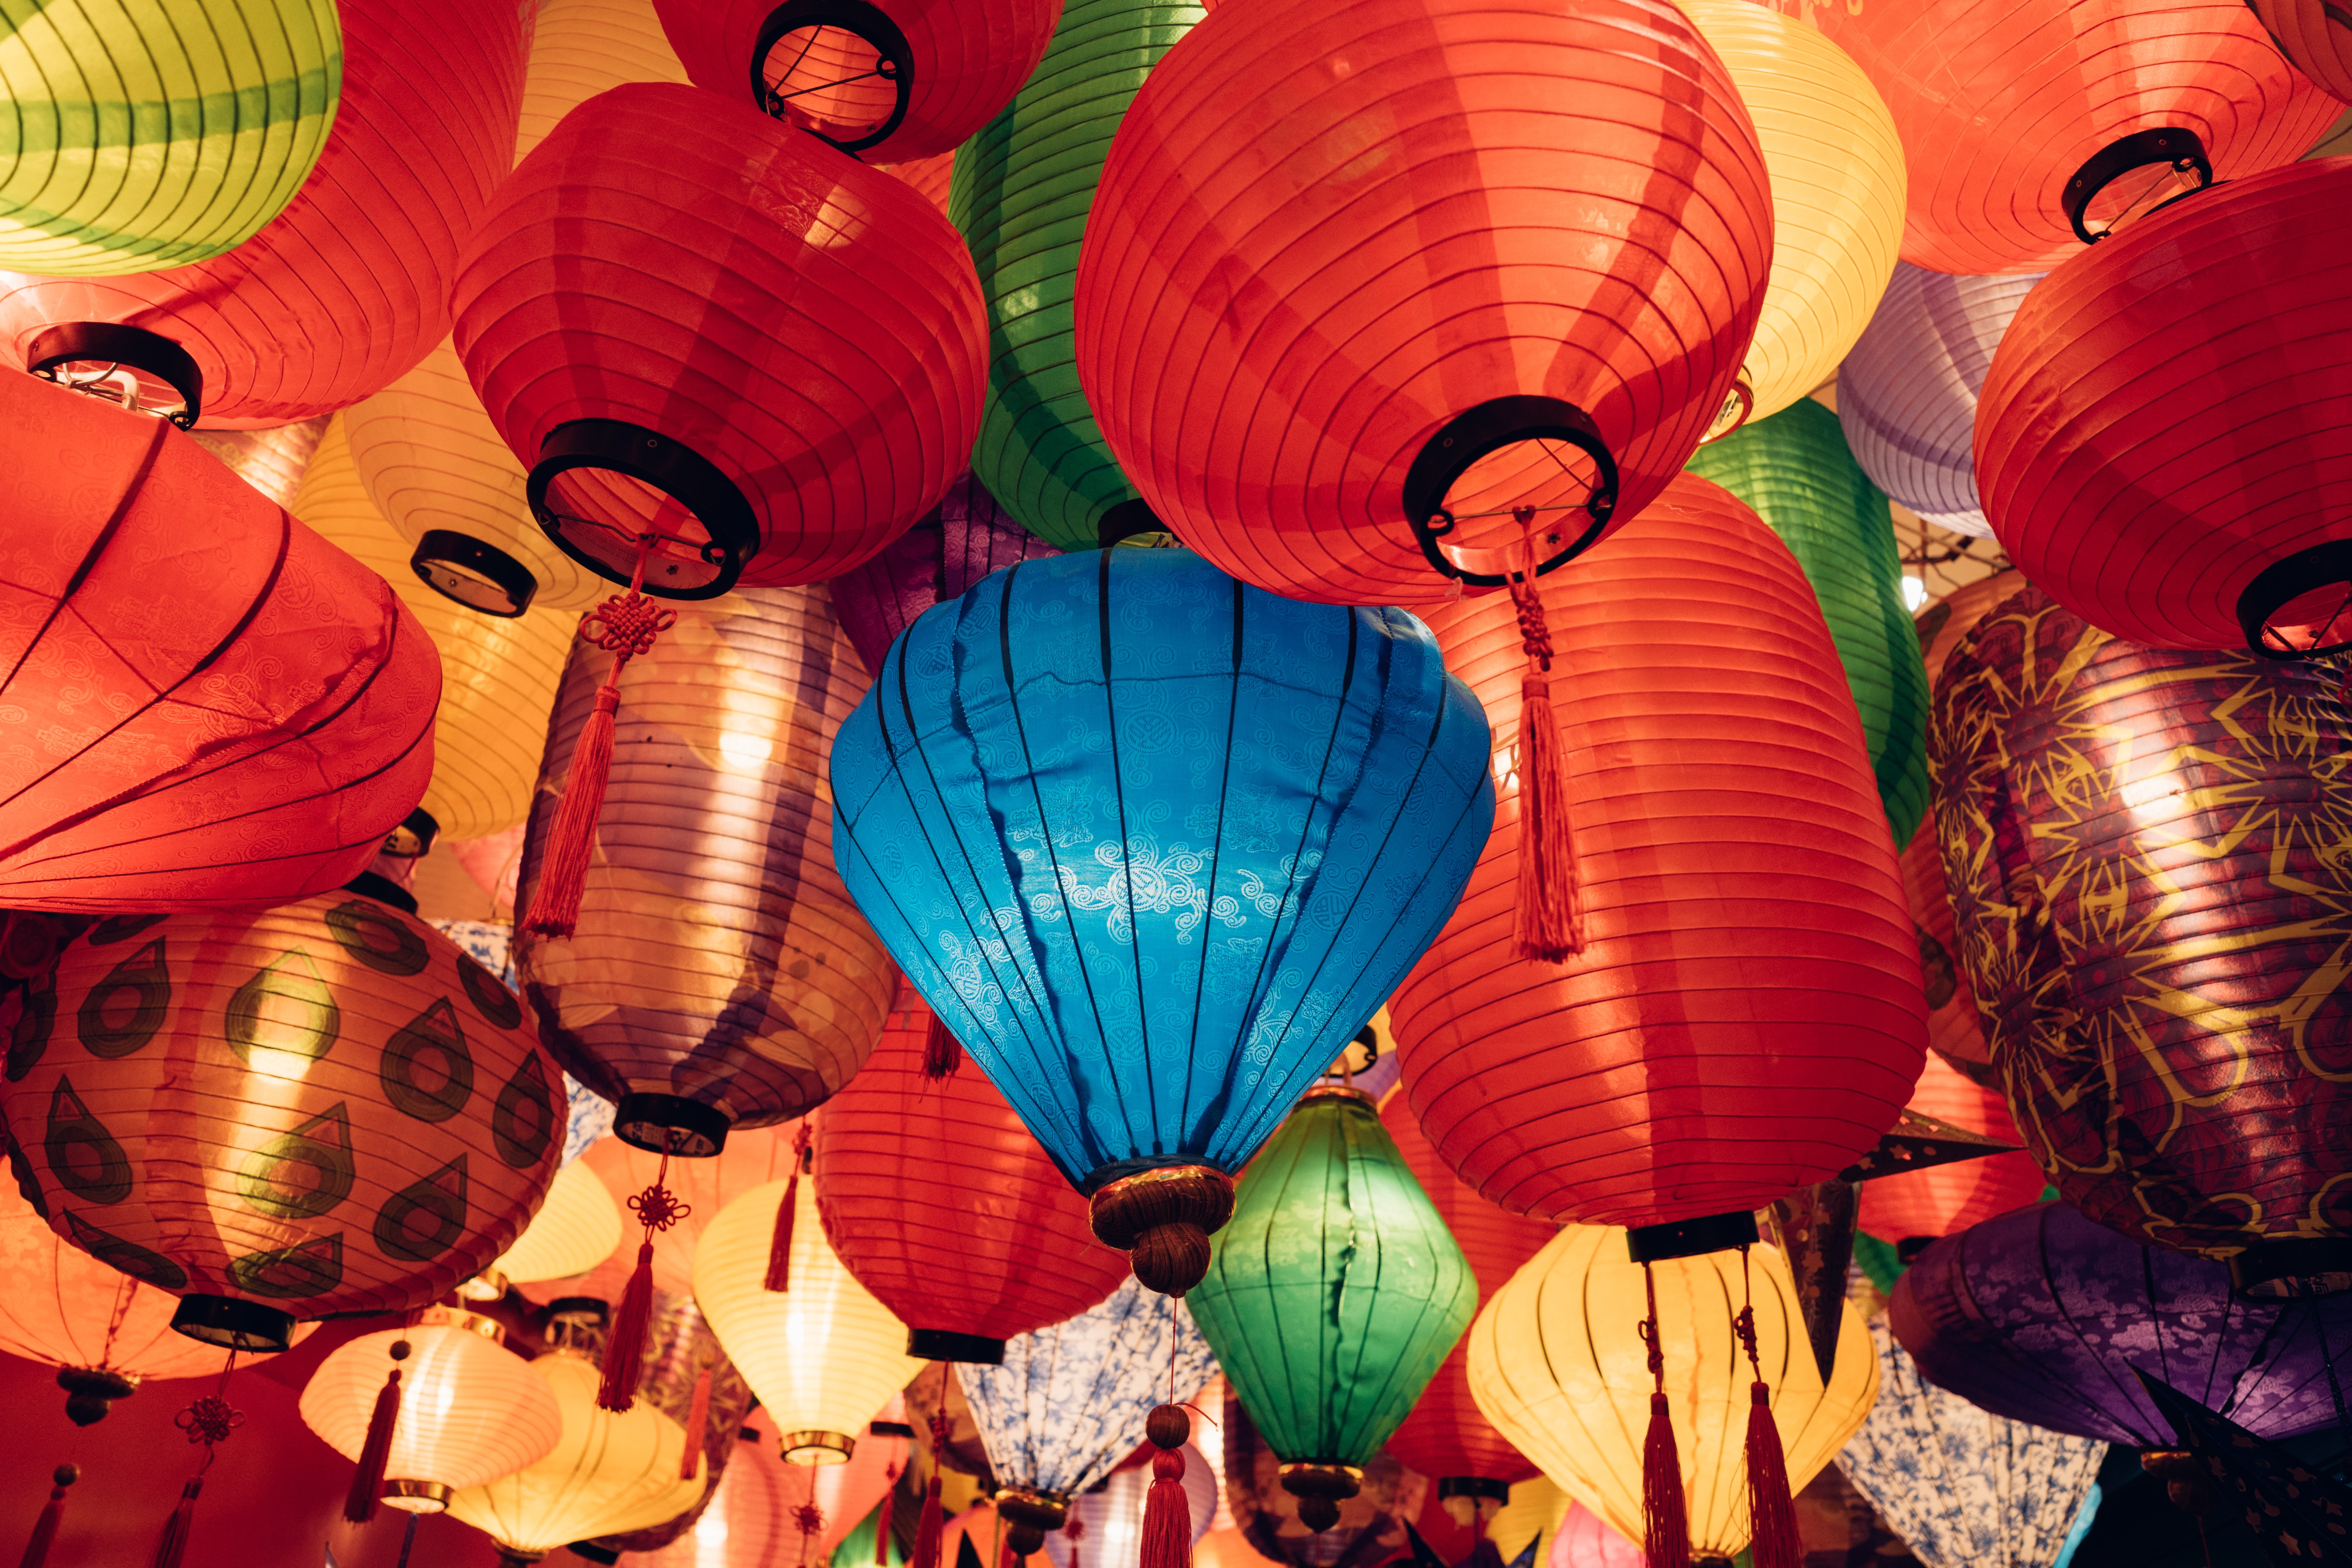 Chinese New Year Wishes: Chinese Spring and Lantern Festival Celebration  (Fun Festivals)